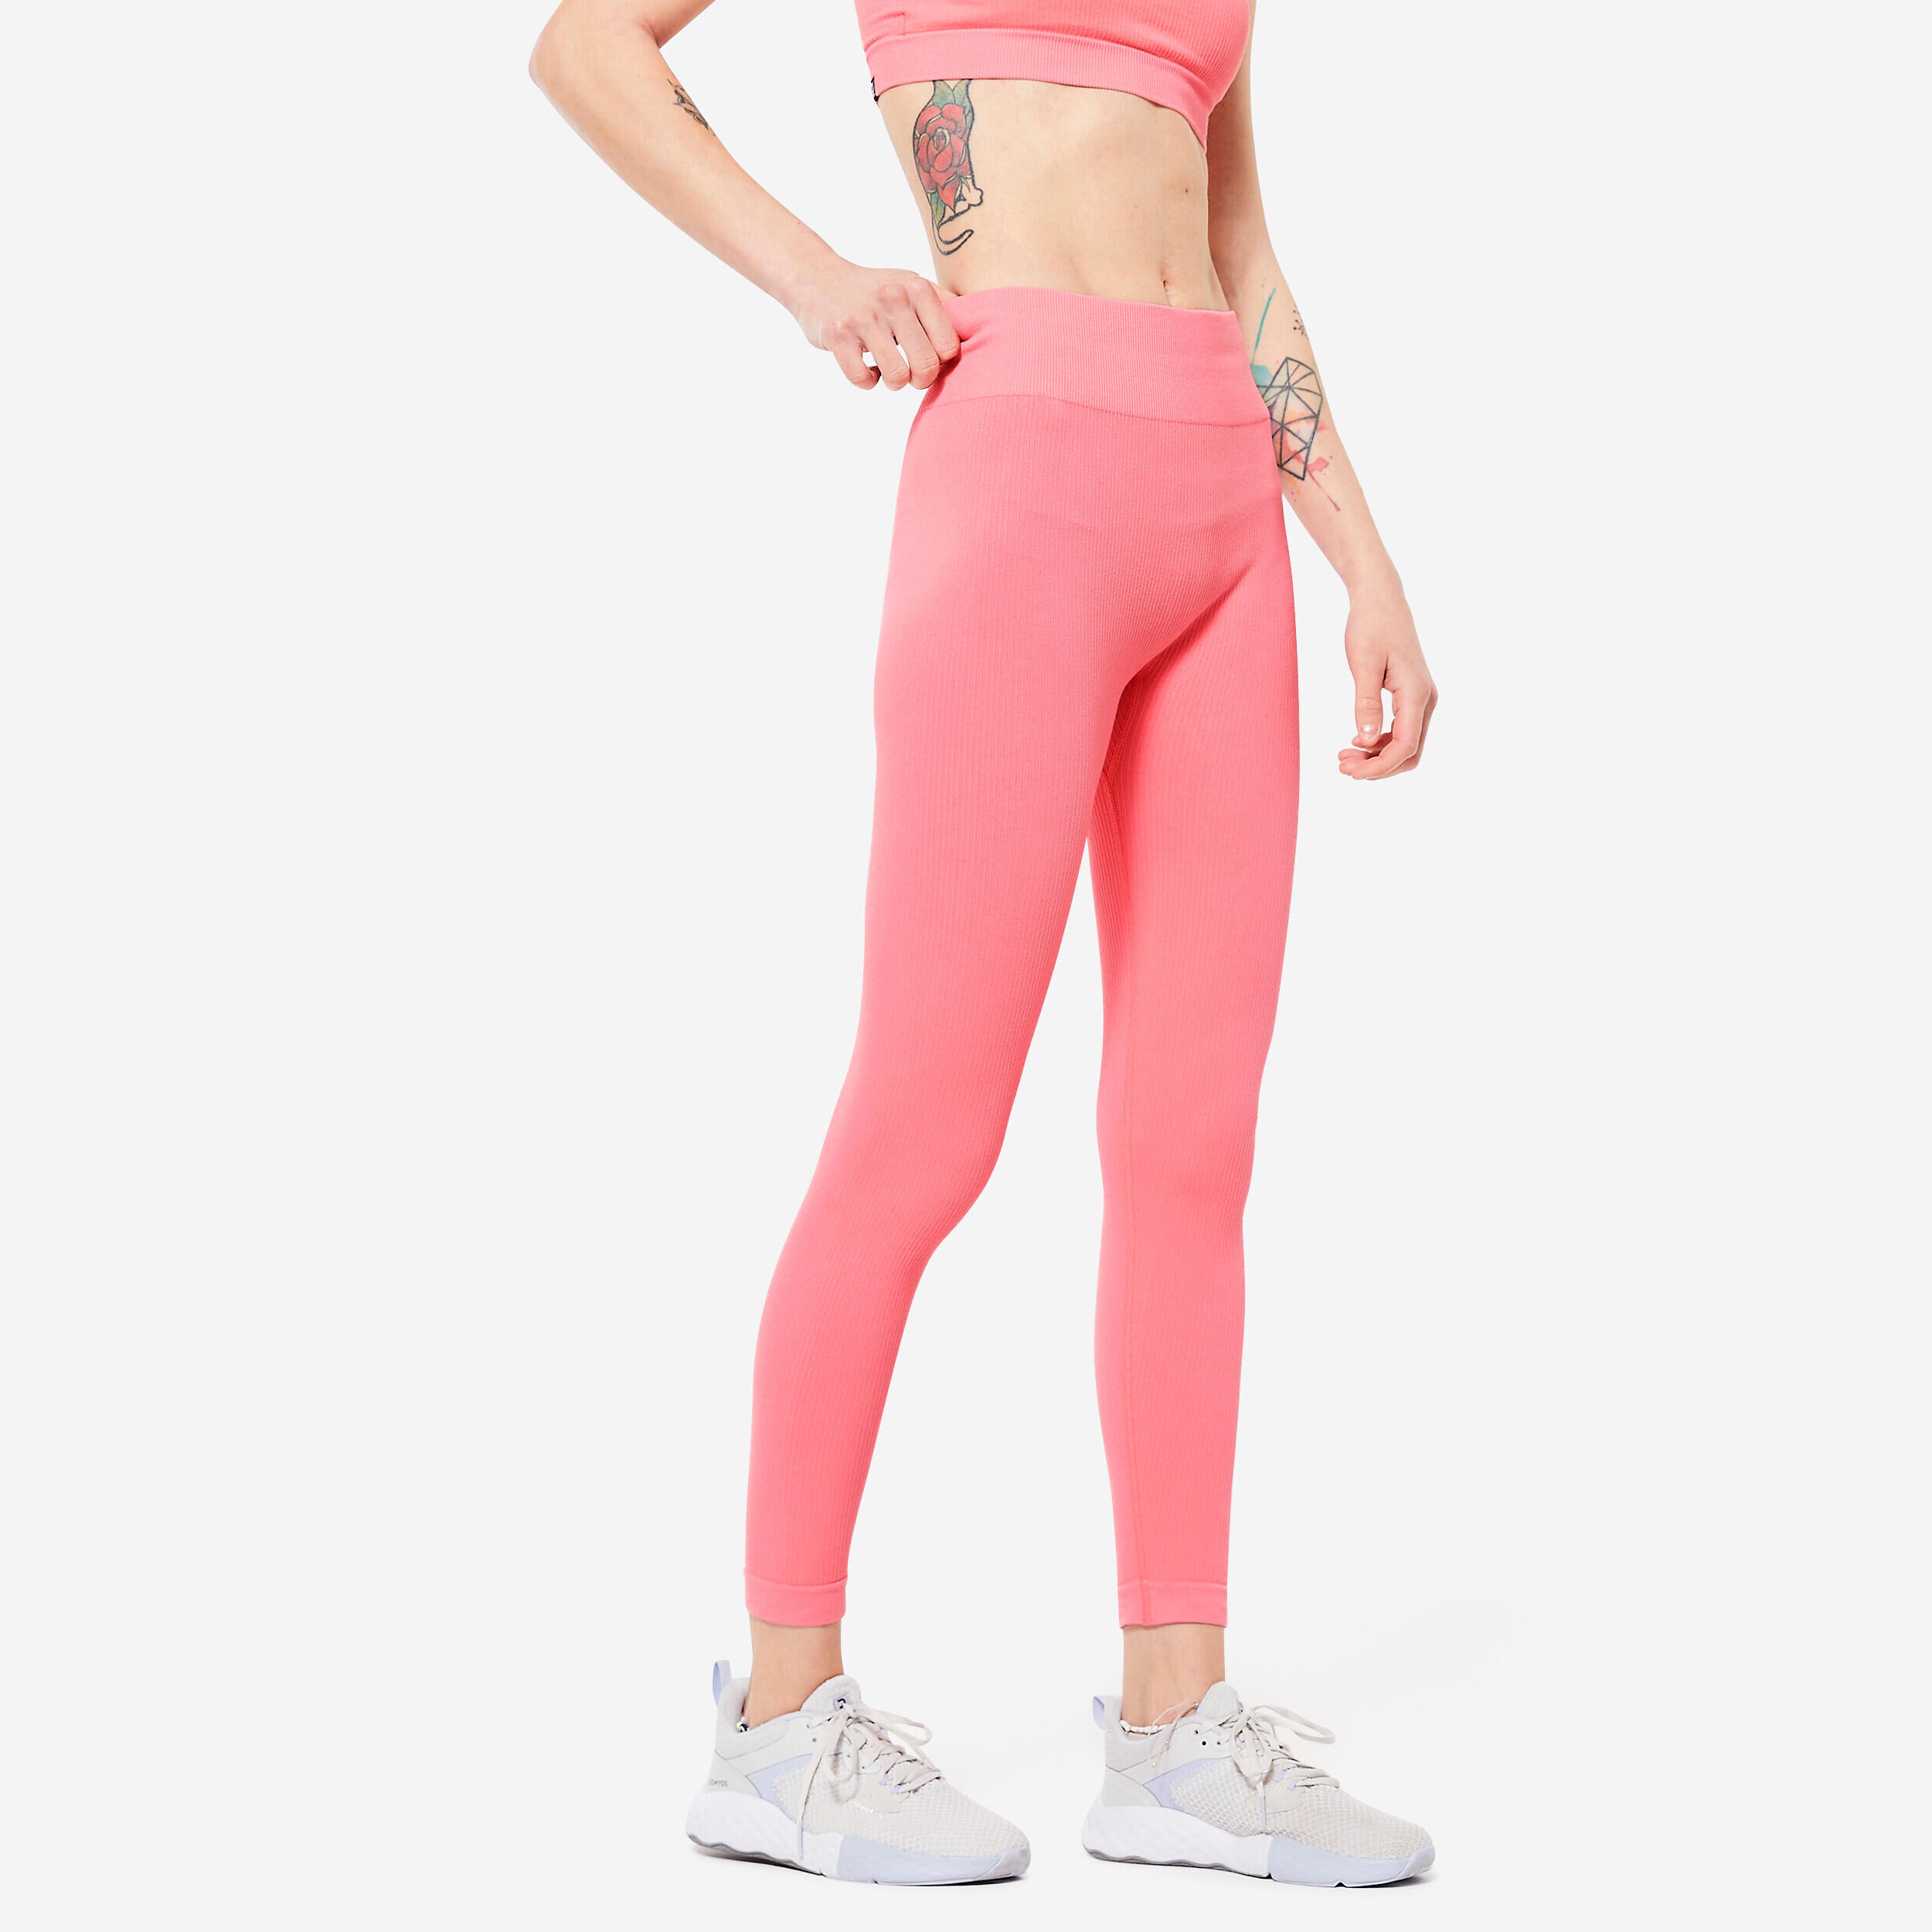 DOMYOS Women's Ribbed Fitness Leggings 520 - Pink Litchi